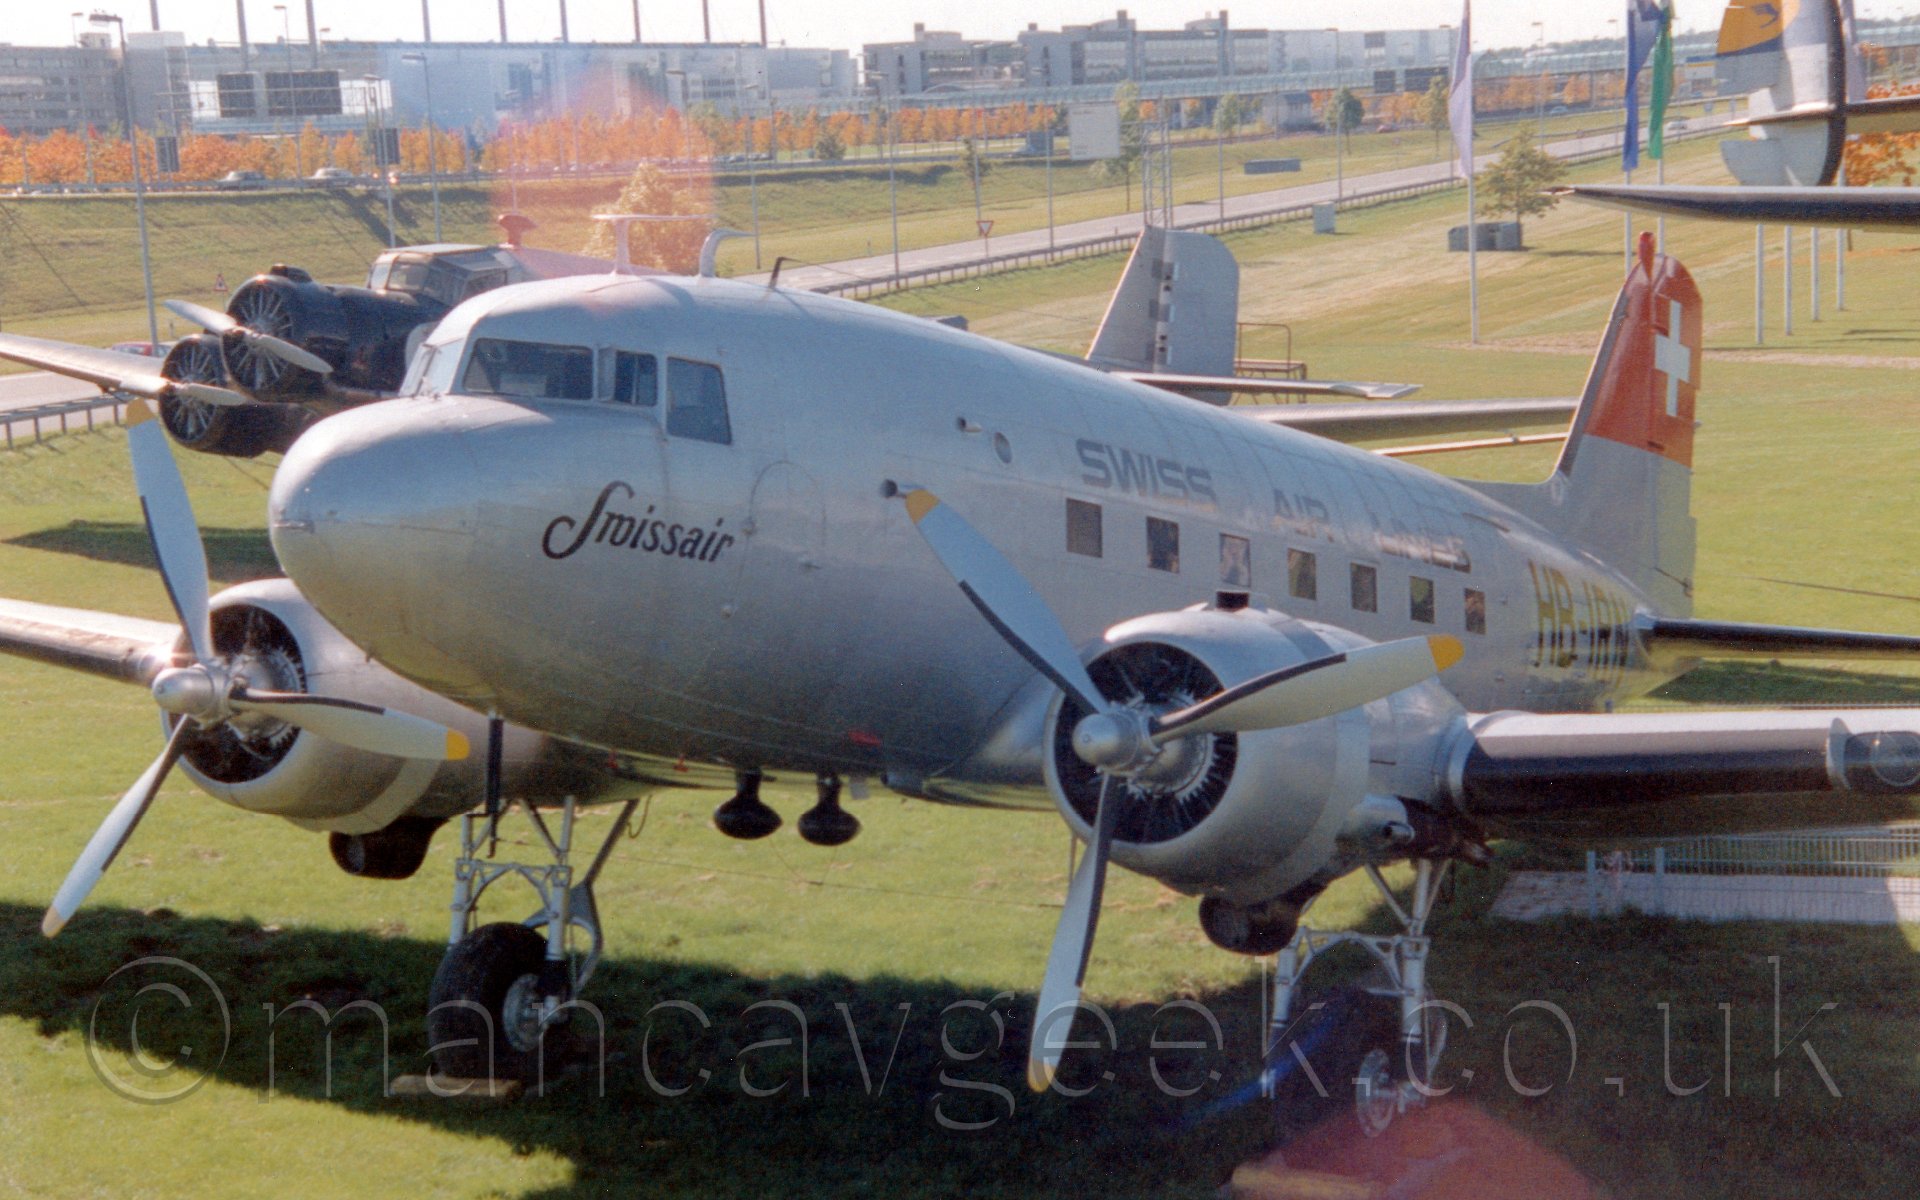 Side view of a bare metal finish, twin propellor-engined World War II-era airliner on display in a grass field with a 3 engined airliner of similar vintage behind it, in bright sunlight.